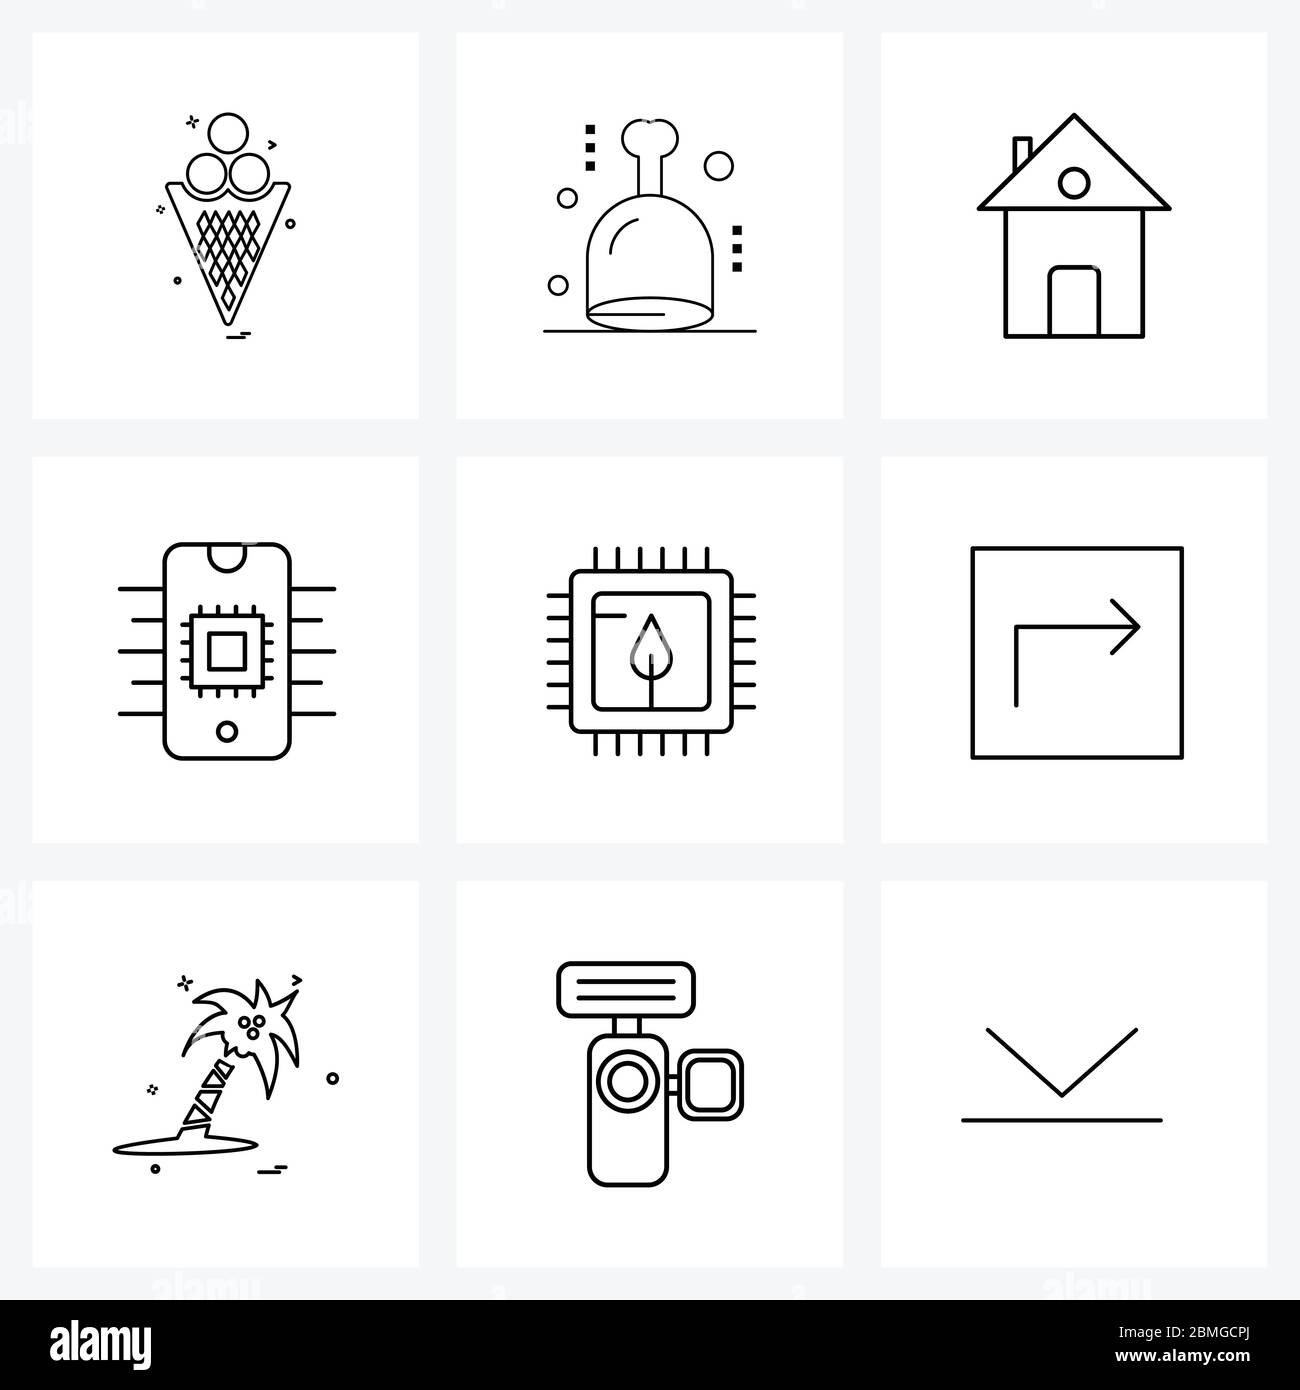 9 Editable Vector Line Icons and Modern Symbols of energy, core, hut, ic, digital Vector Illustration Stock Vector